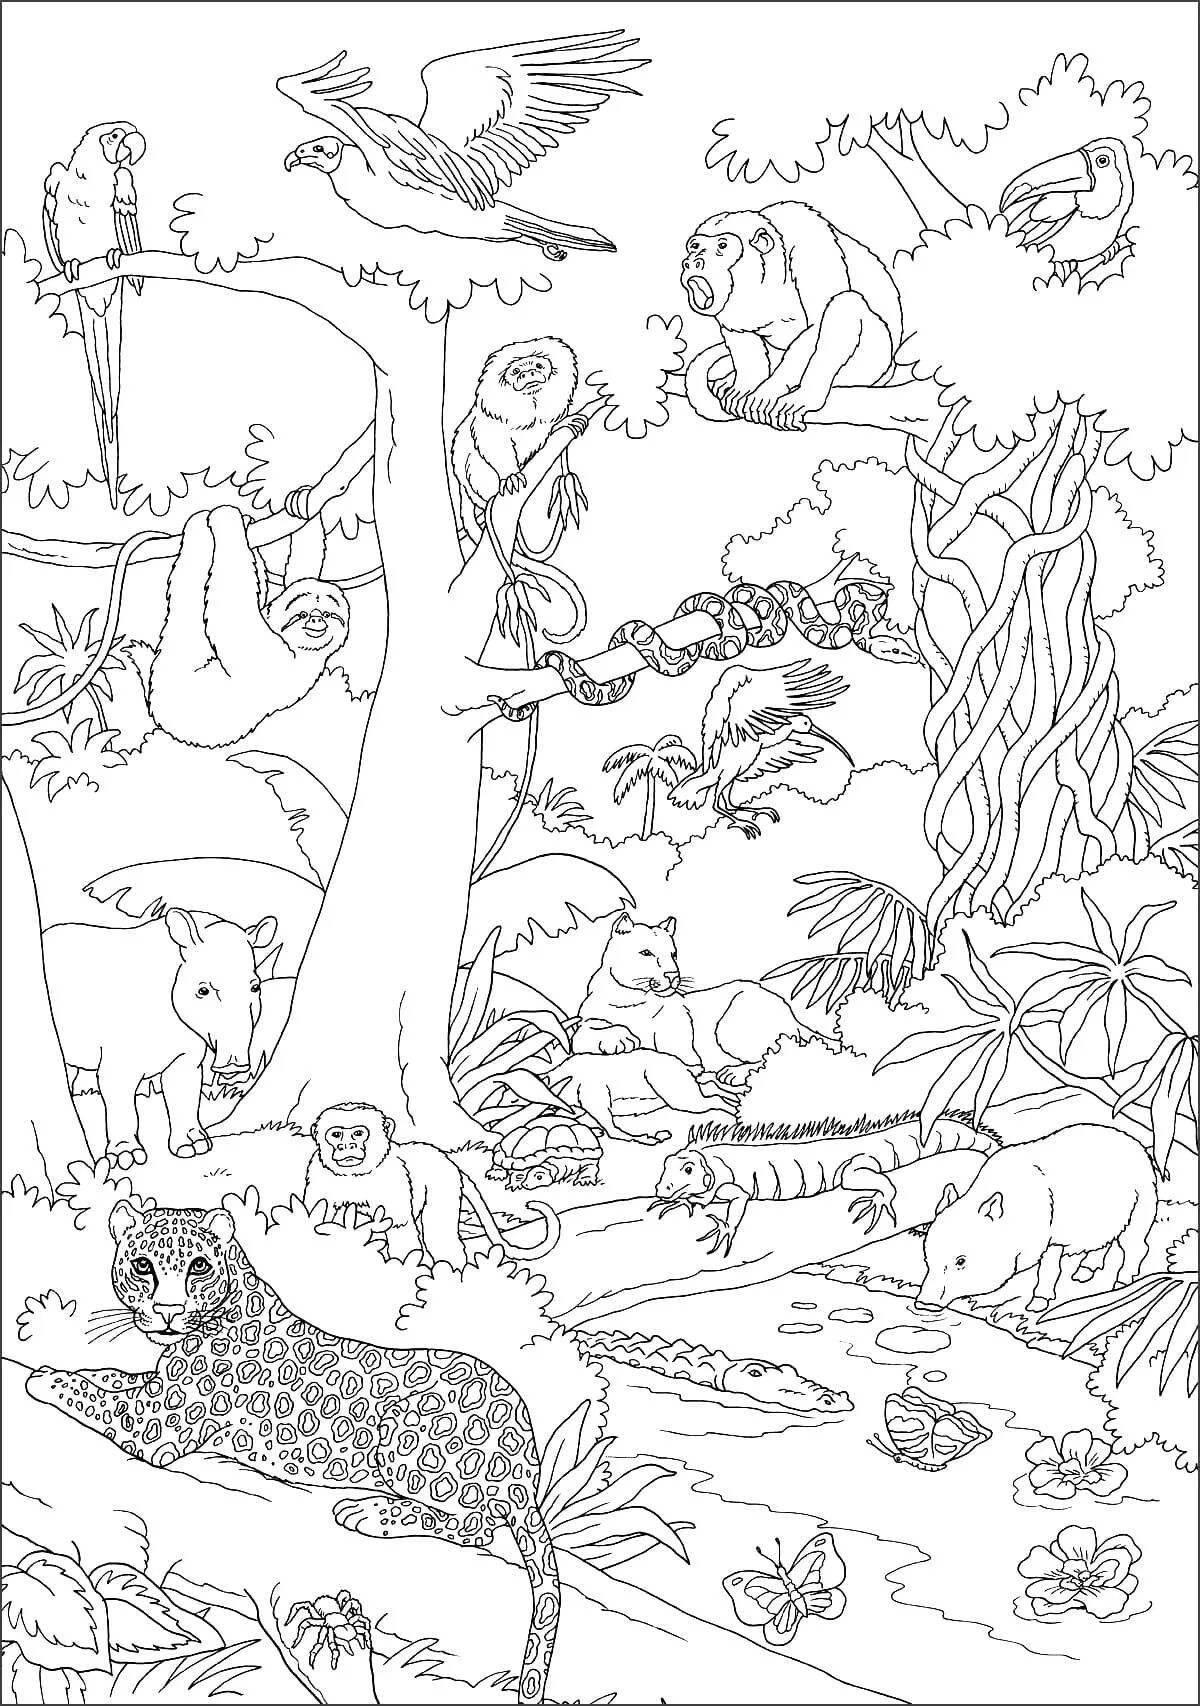 Coloring page dazzling jungle animals